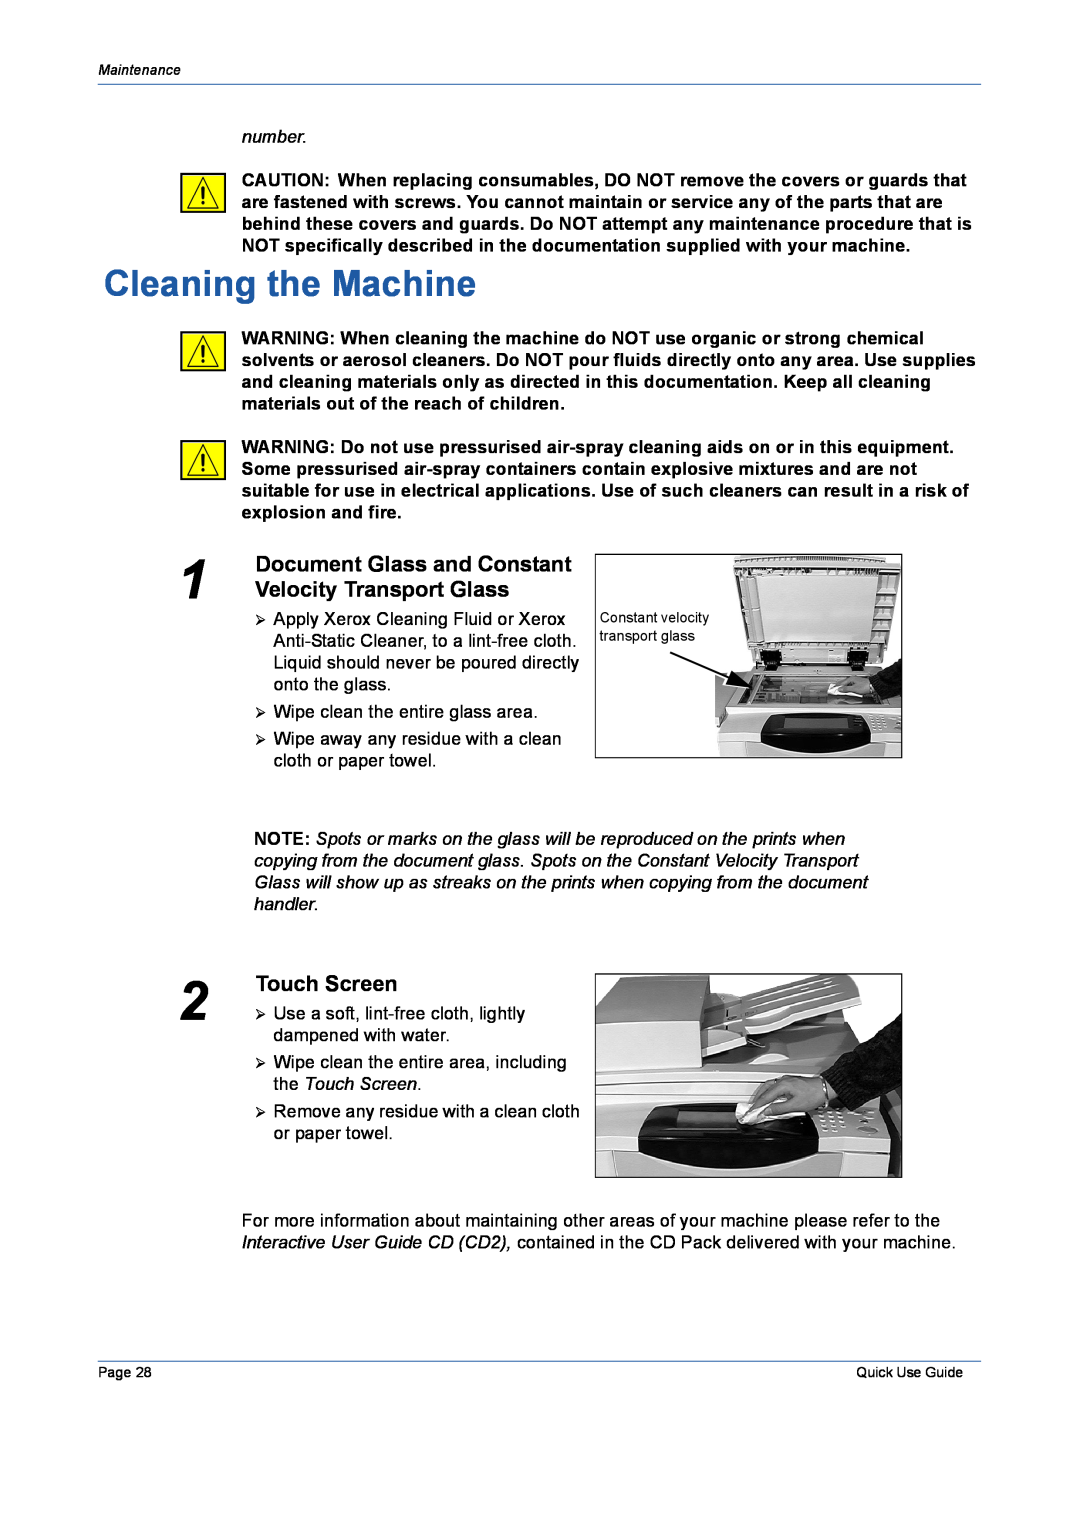 Xerox 5632 manual Cleaning the Machine, Document Glass and Constant, Velocity Transport Glass, Touch Screen 